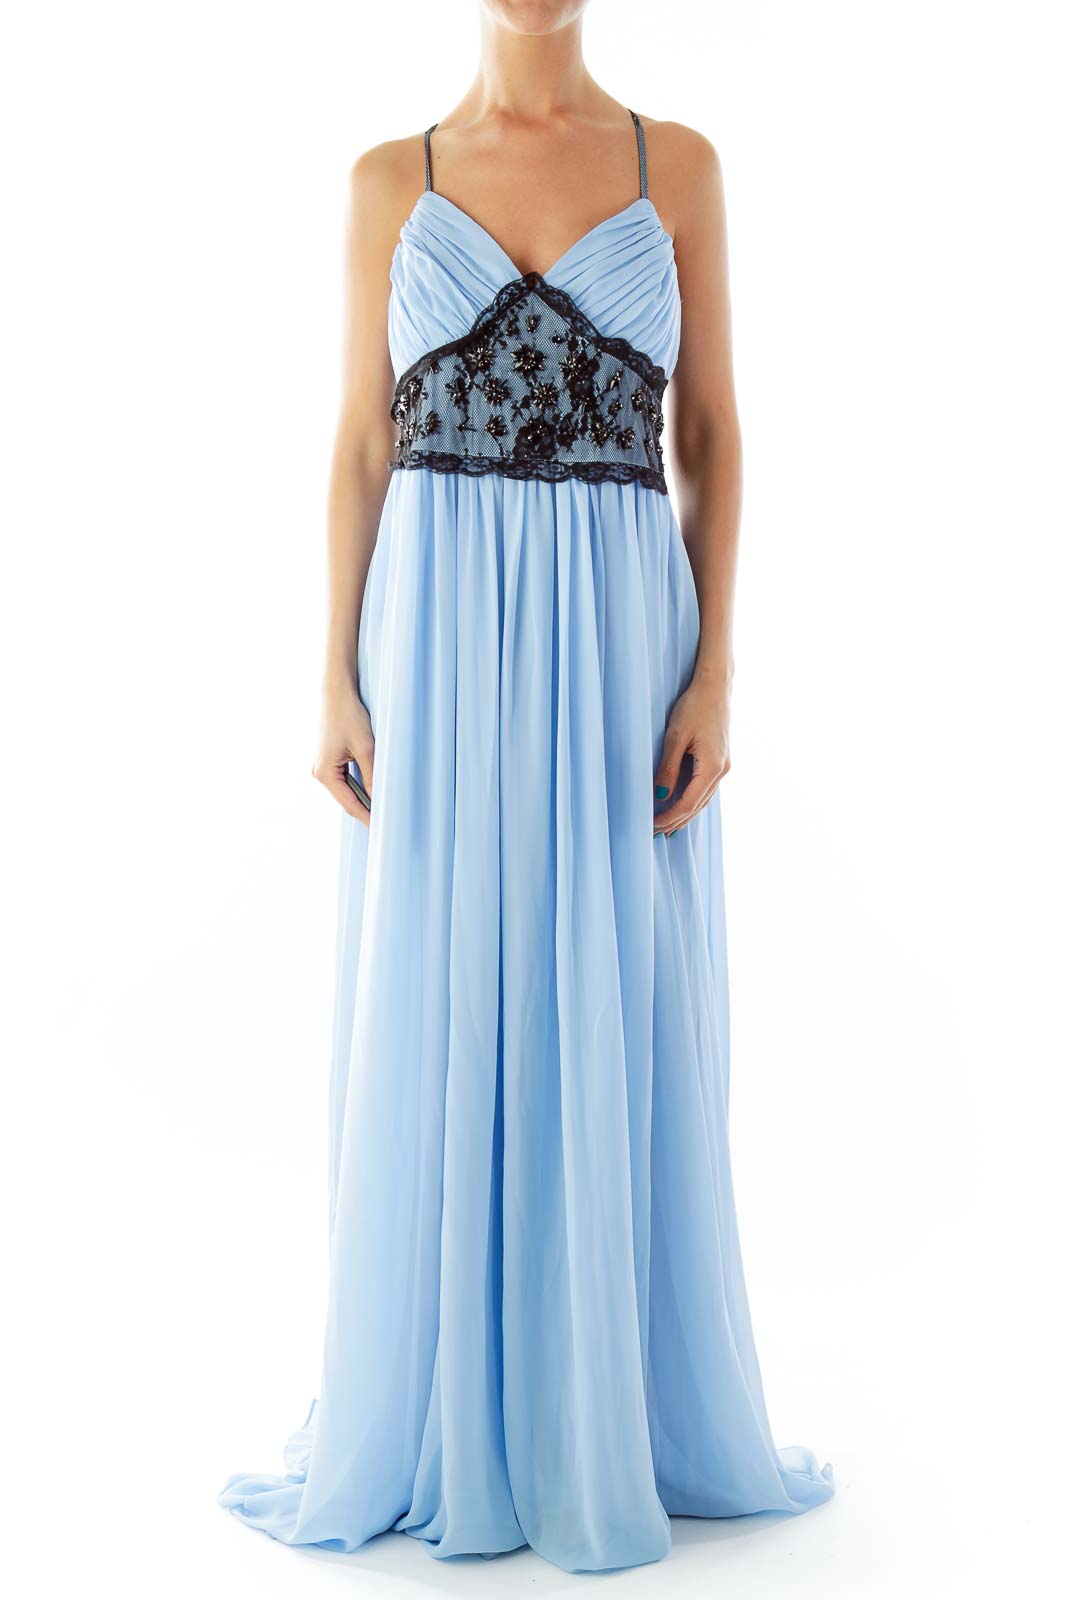 Baby Blue Evening Dress Front